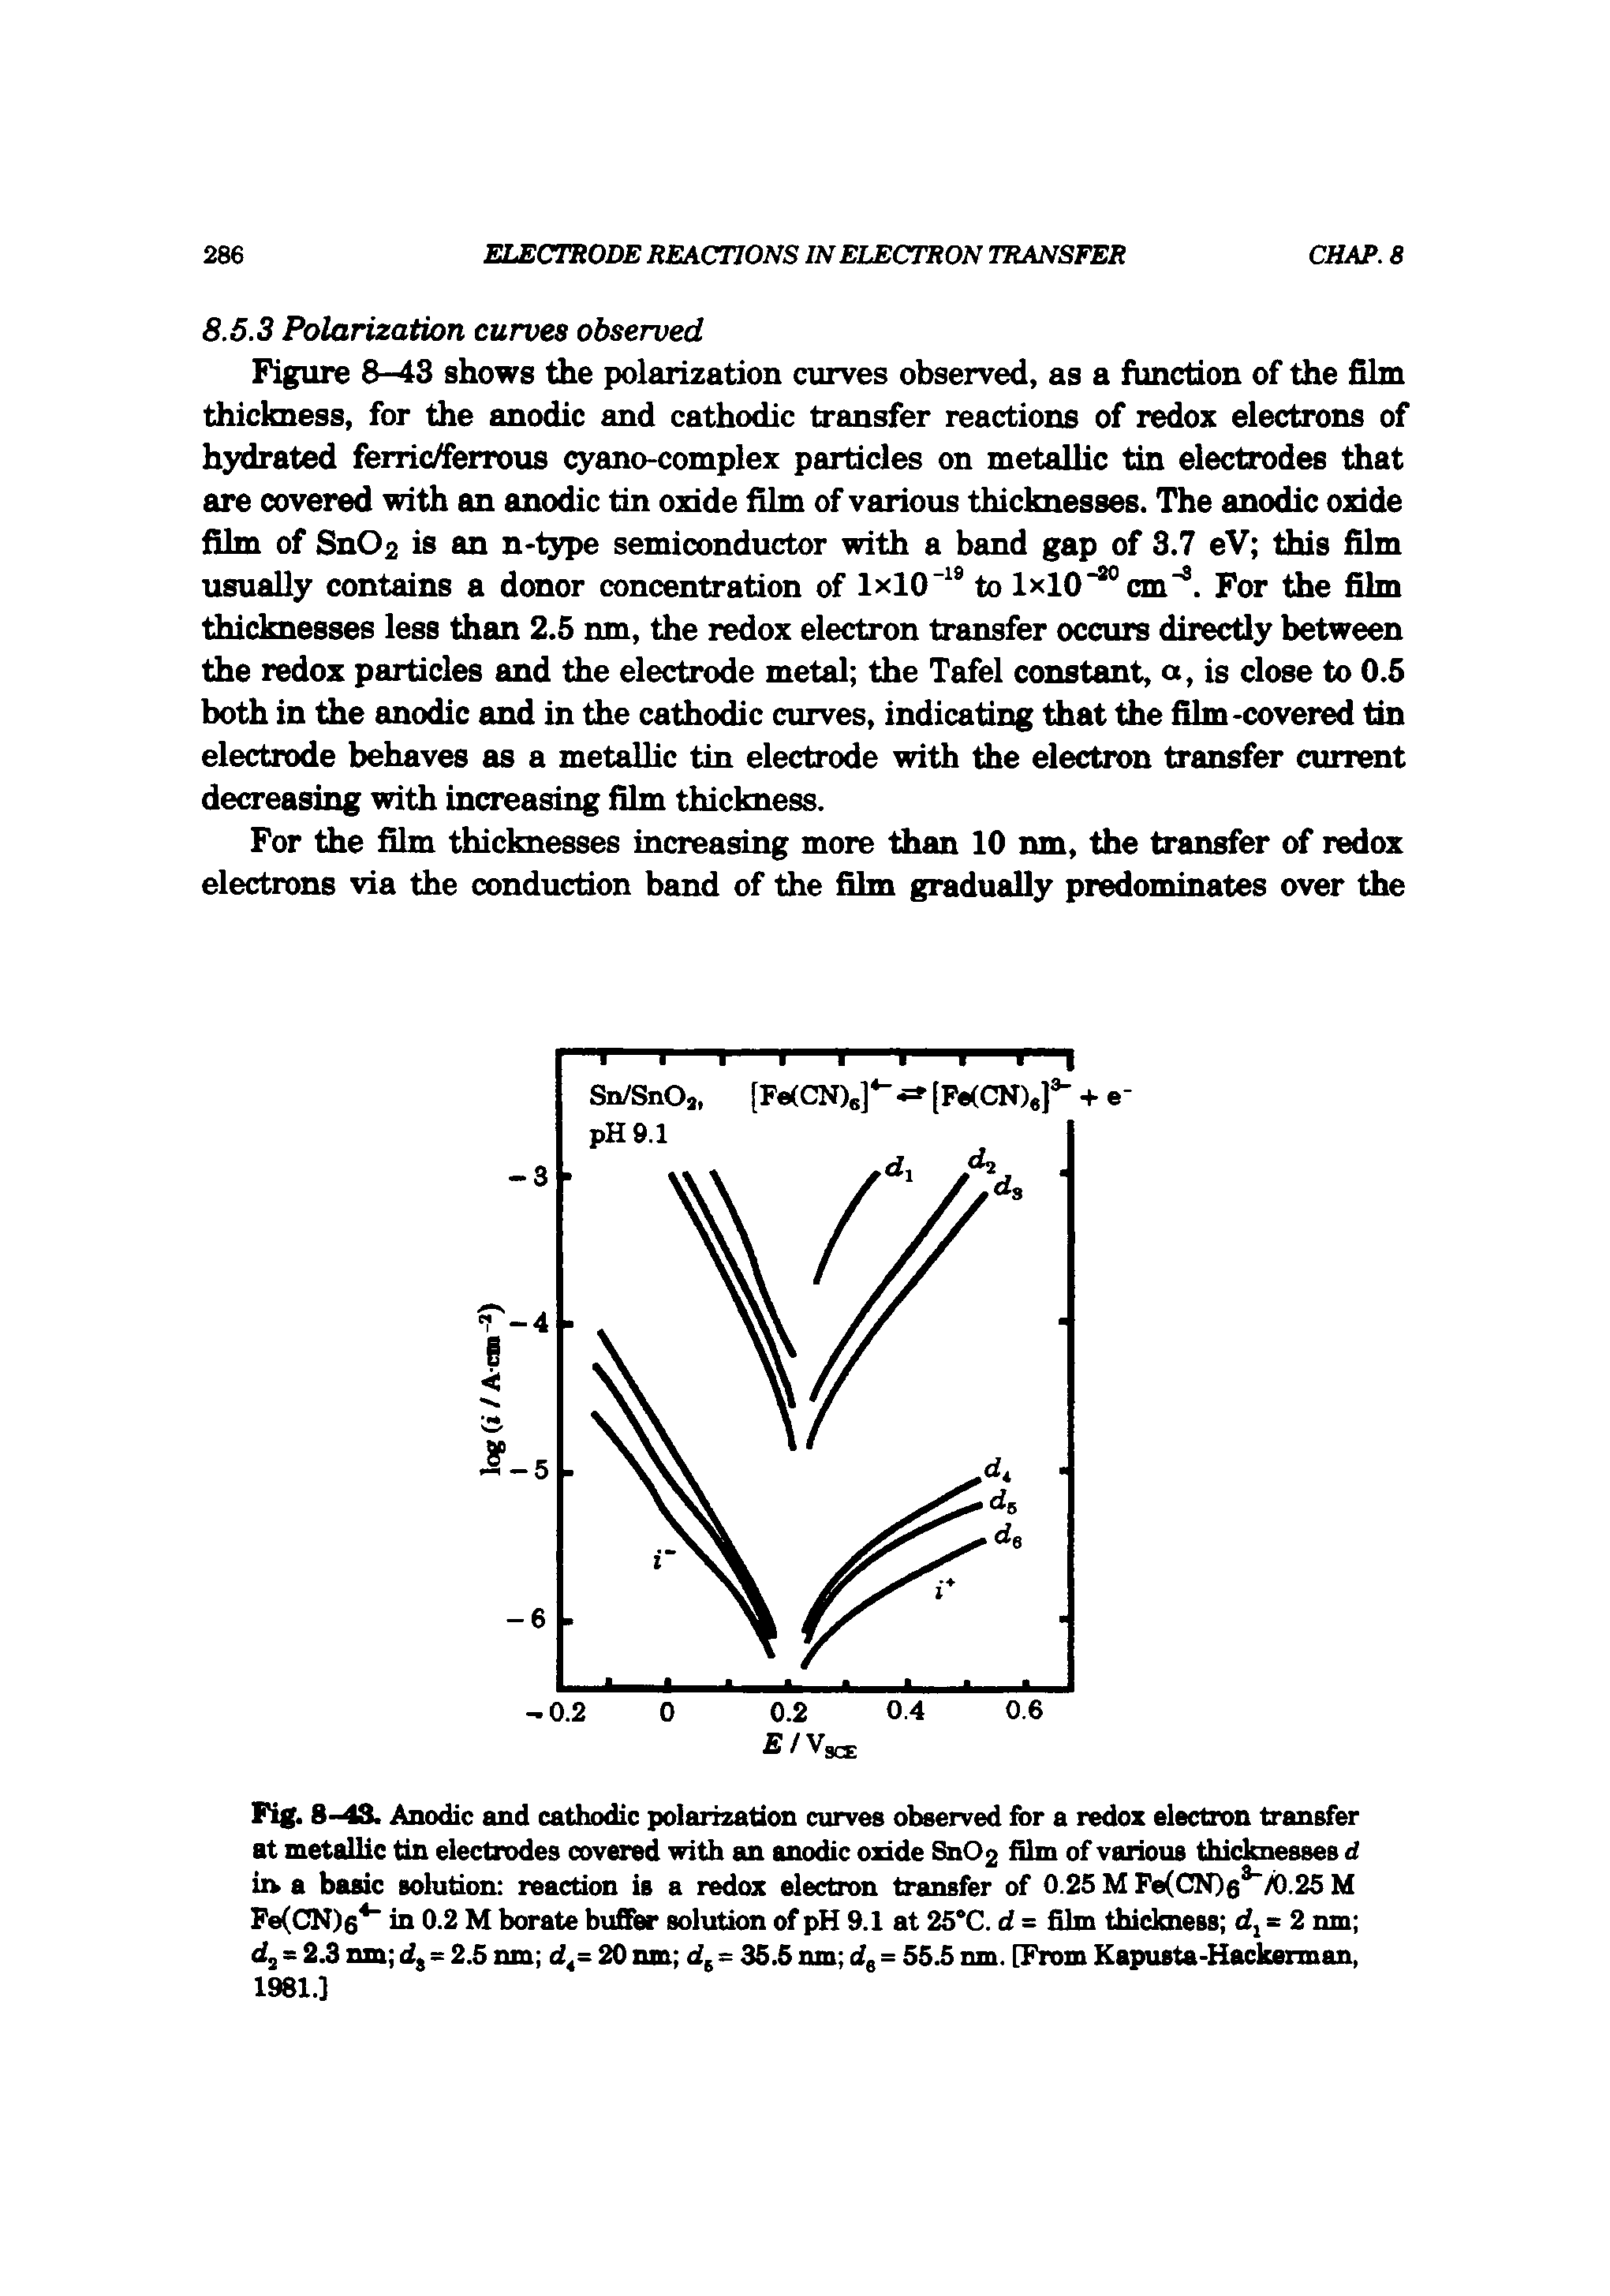 Figure S-4S shows the polarization curves observed, as a function of the film thickness, for the anodic and cathodic transfer reactions of redox electrons of hydrated ferric/ferrous cyano-complex particles on metallic tin electrodes that are covered with an anodic tin oxide film of various thicknesses. The anodic oxide film of Sn02 is an n-type semiconductor with a band gap of 3.7 eV this film usually contains a donor concentration of 1x10" ° to lxl0 °cm °. For the film thicknesses less than 2.5 nm, the redox electron transfer occurs directly between the redox particles and the electrode metal the Tafel constant, a, is close to 0.5 both in the anodic and in the cathodic curves, indicating that the film-covered tin electrode behaves as a metallic tin electrode with the electron transfer current decreasing with increasing film thickness.